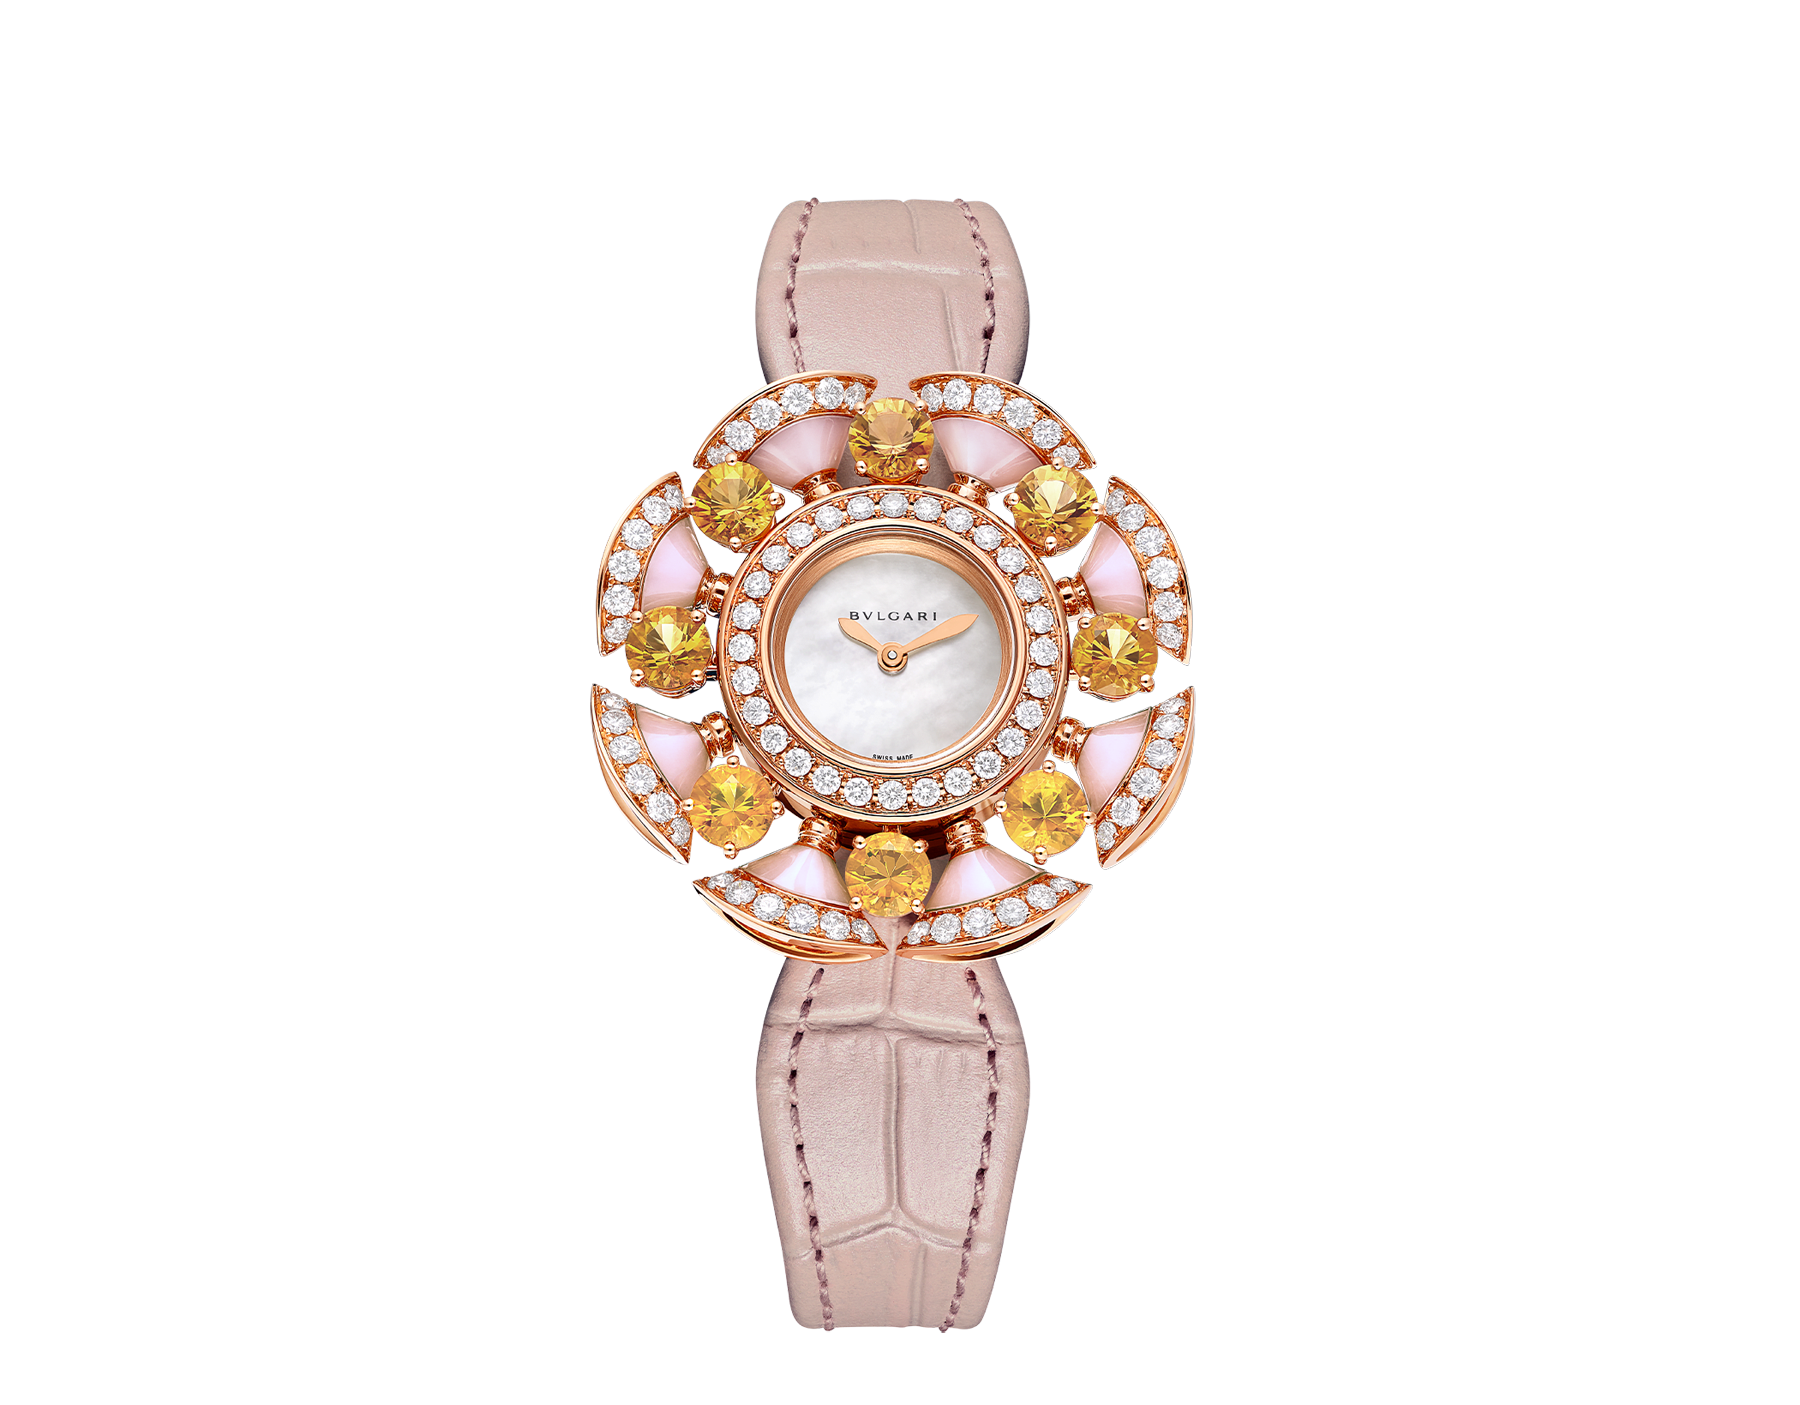 DIVAS' DREAM watch featuring a 18 kt rose gold case and petals set with round brilliant-cut diamonds, pink opal inserts and citrine, mother-of-pearl dial and pink alligator bracelet 103635 image 1